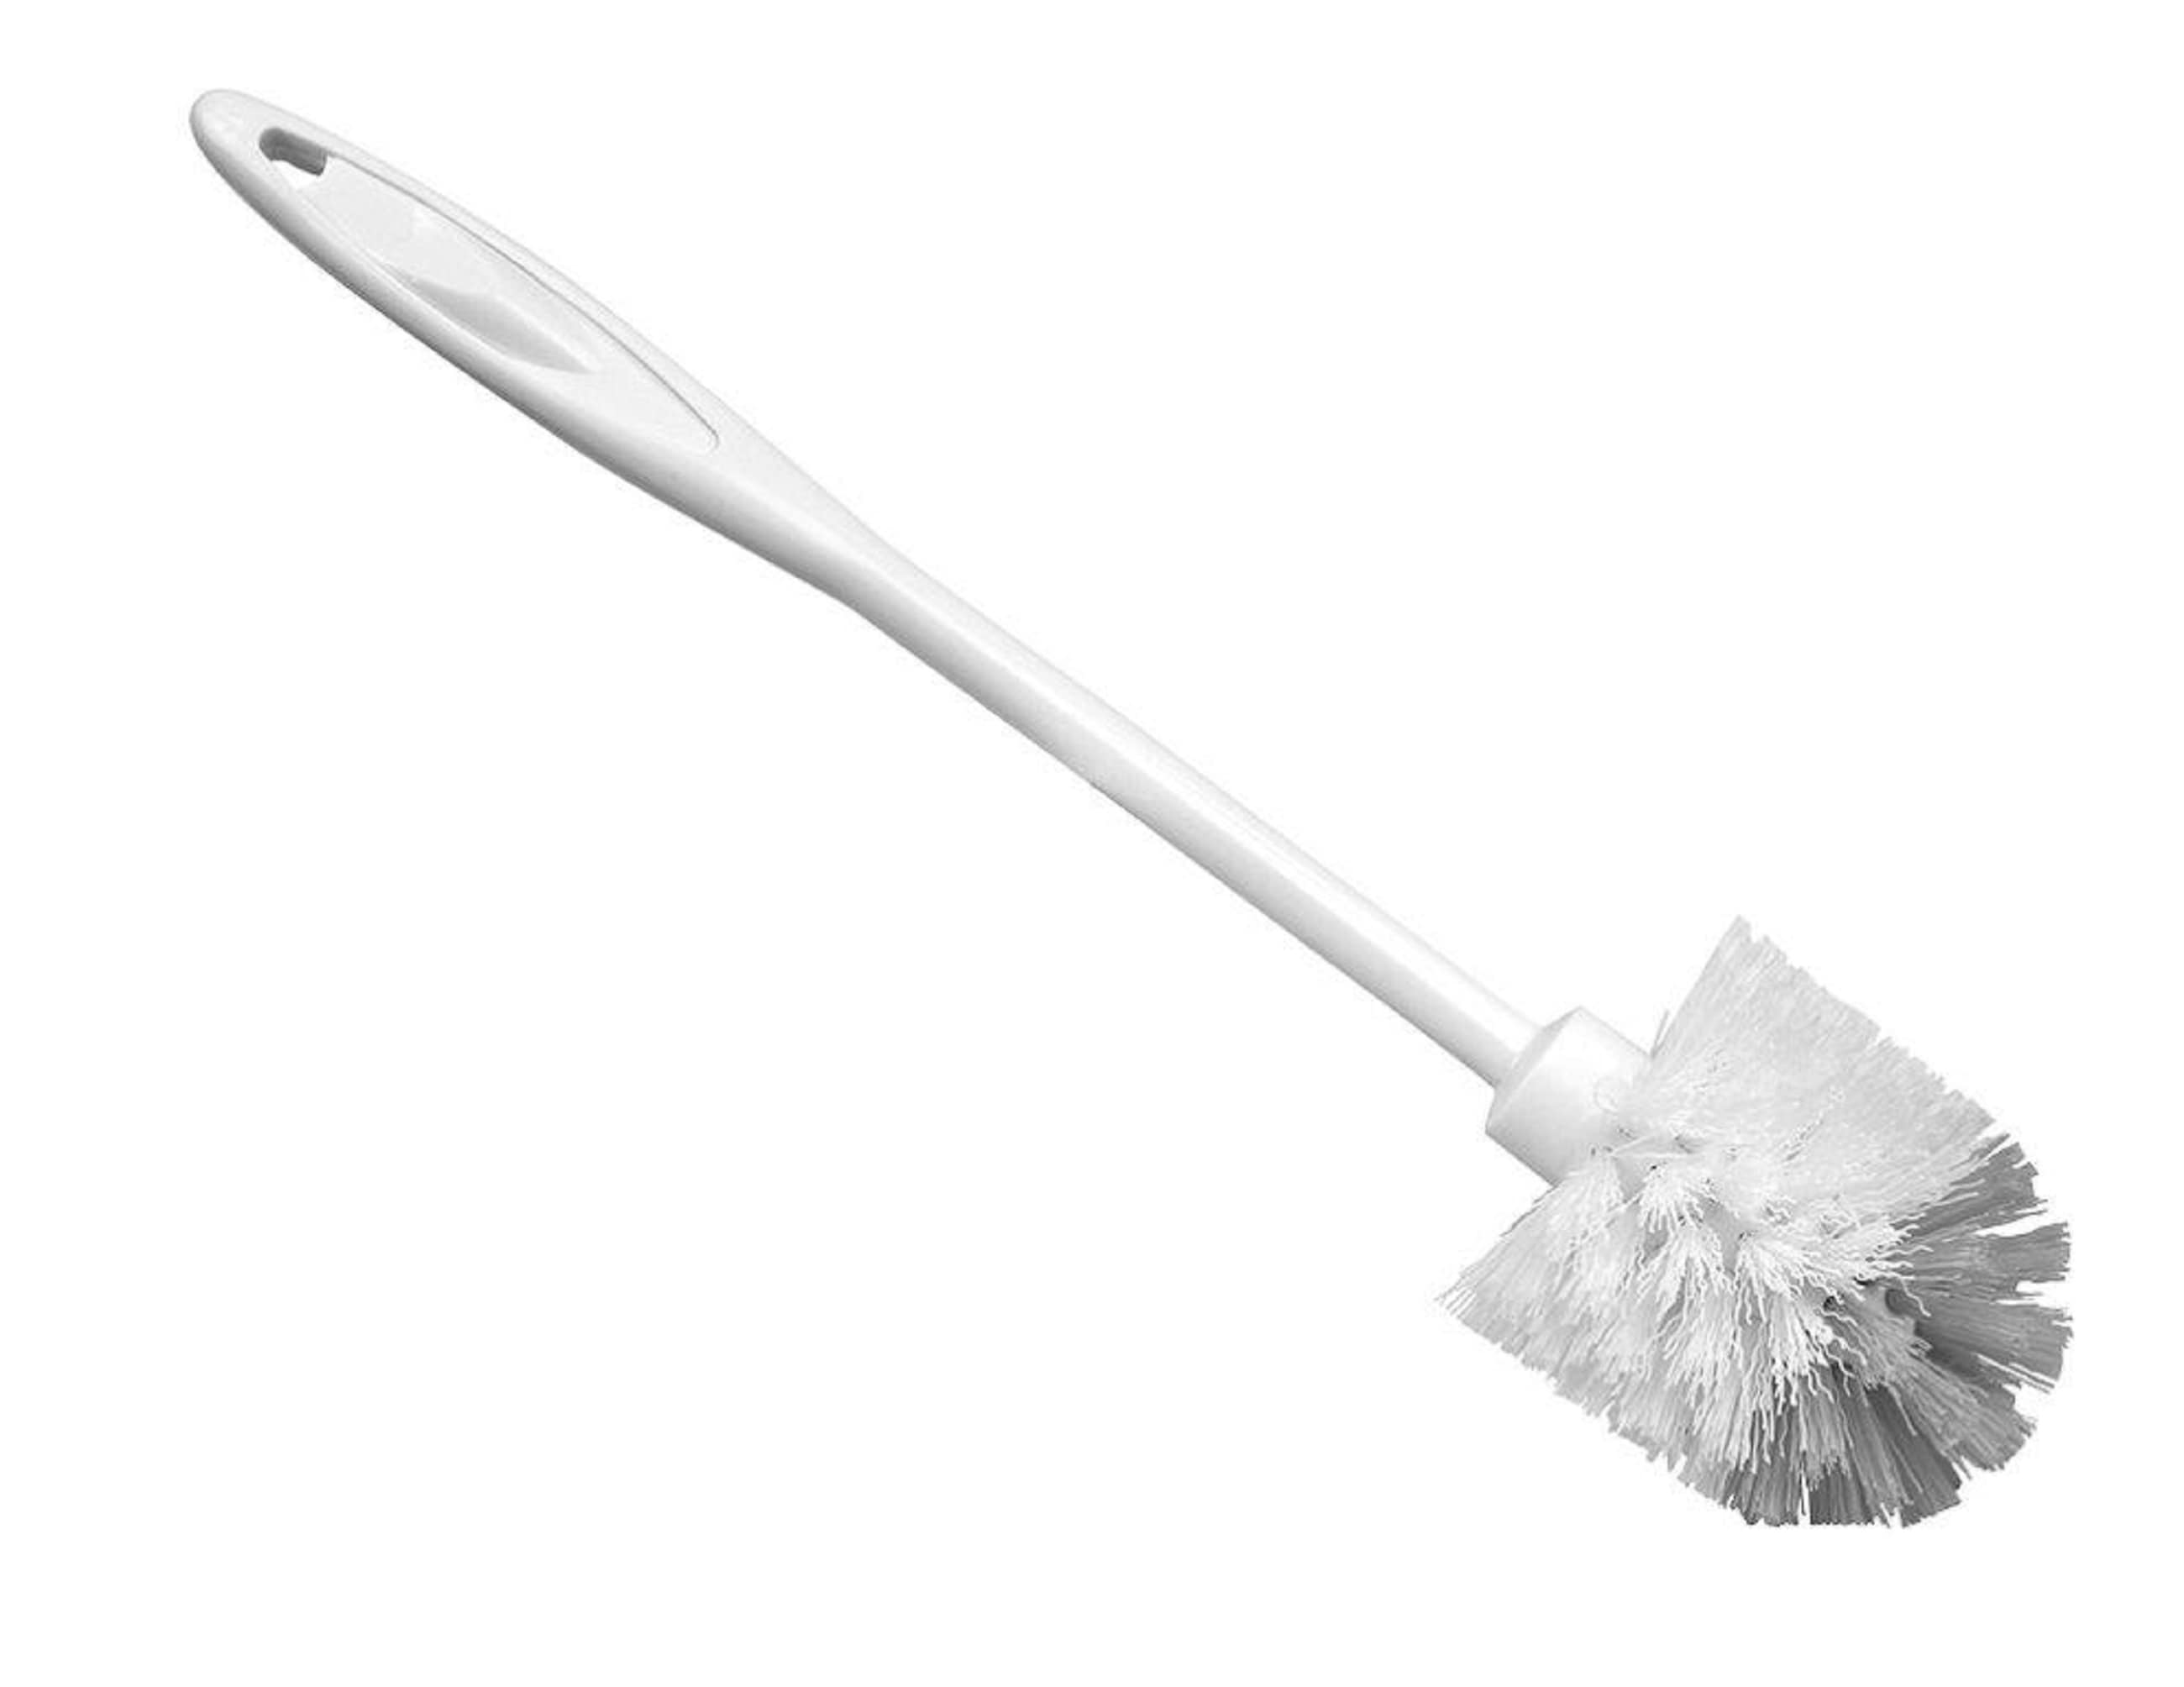 1pc Kitchen Household Cleaning Brush Magic Brush For Tile, Pot, Bowl,  Bathroom, Basin, Toilet, With Charging Function